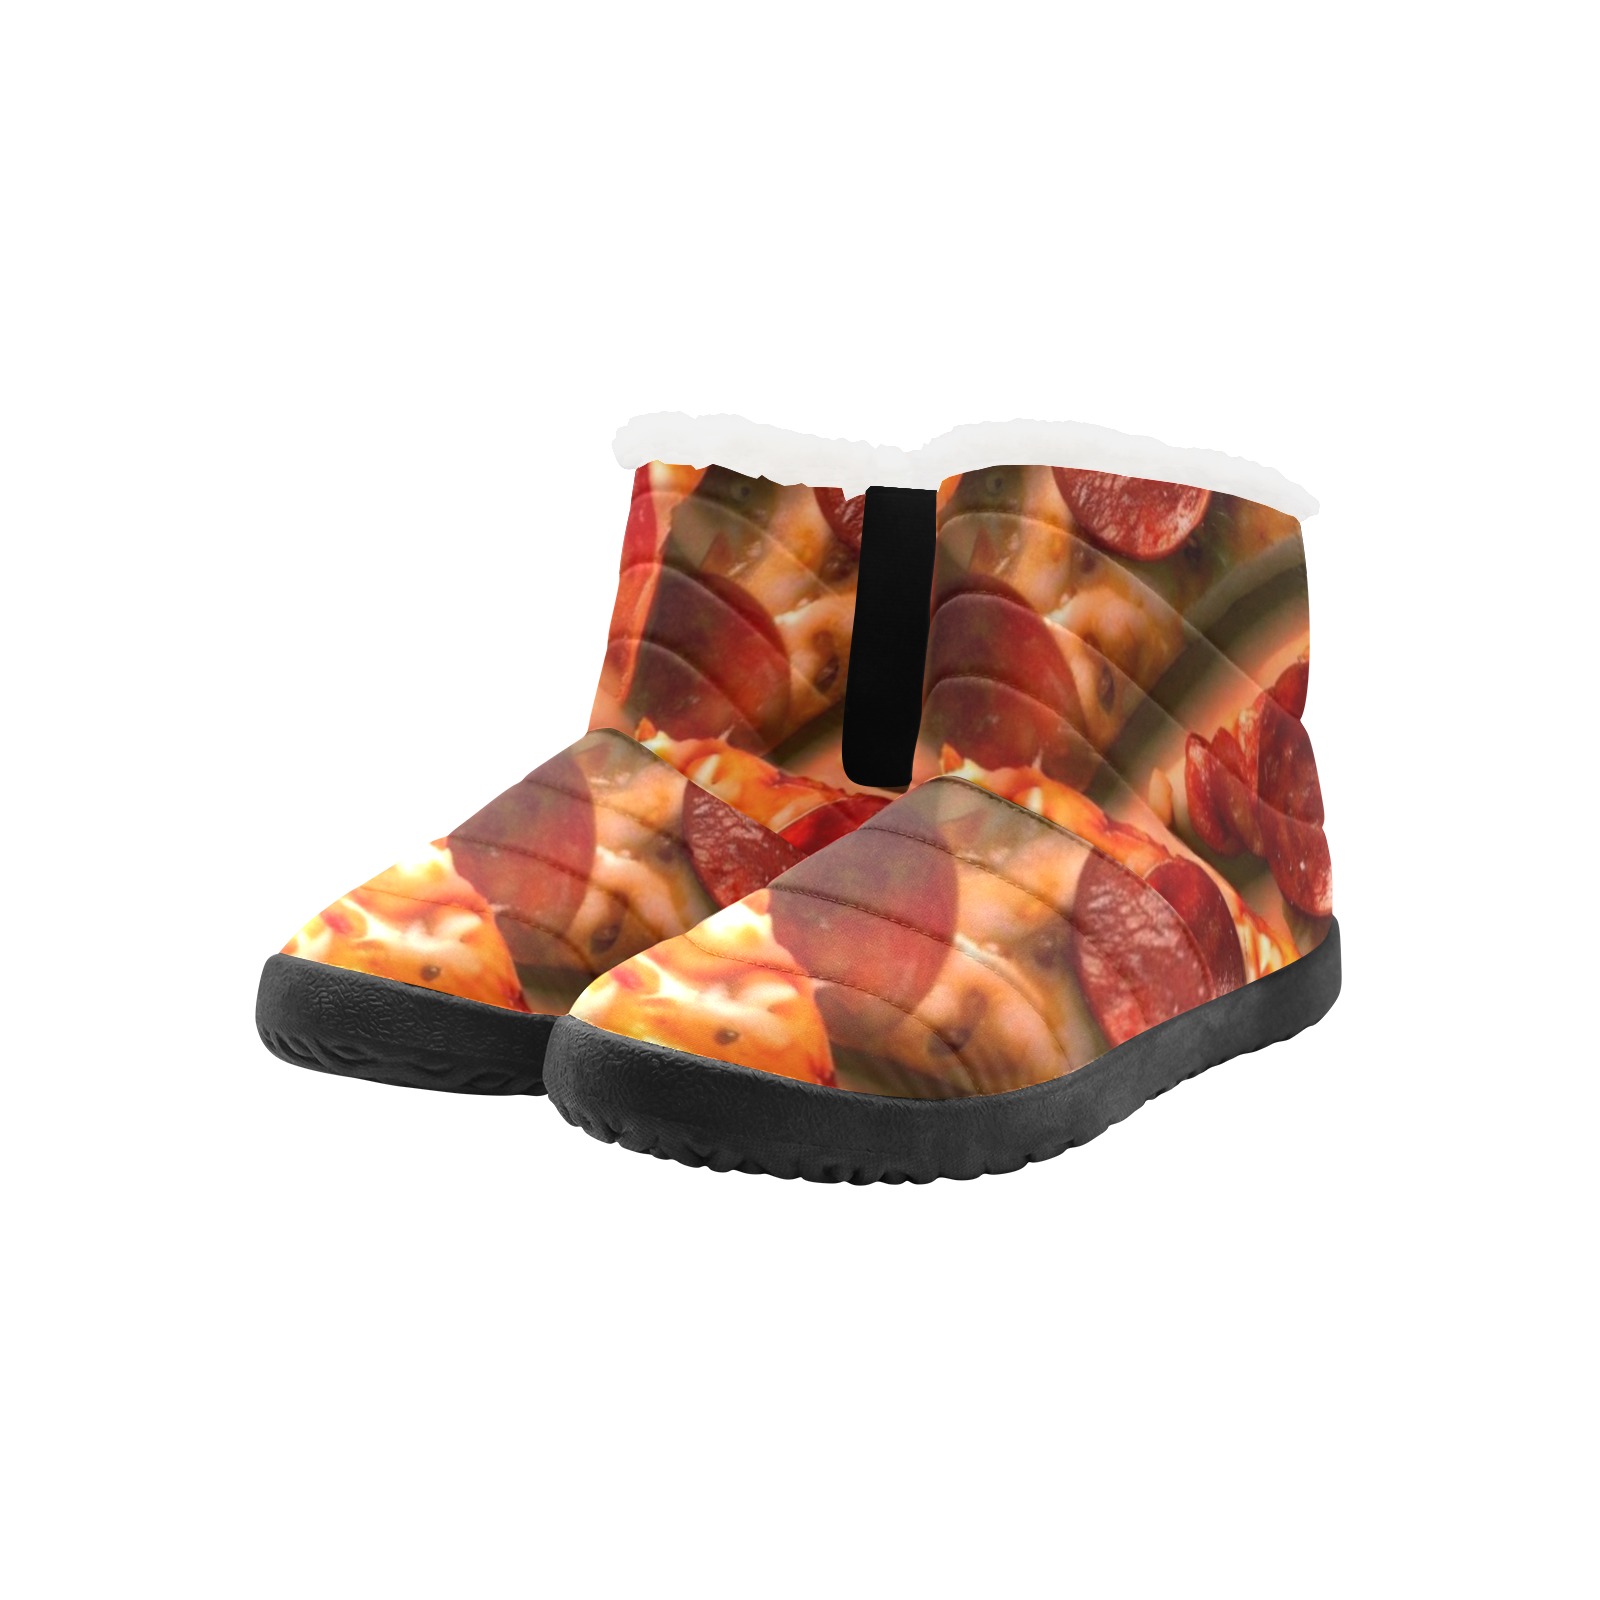 PEPPERONI PIZZA 11 Men's Cotton-Padded Shoes (Model 19291)